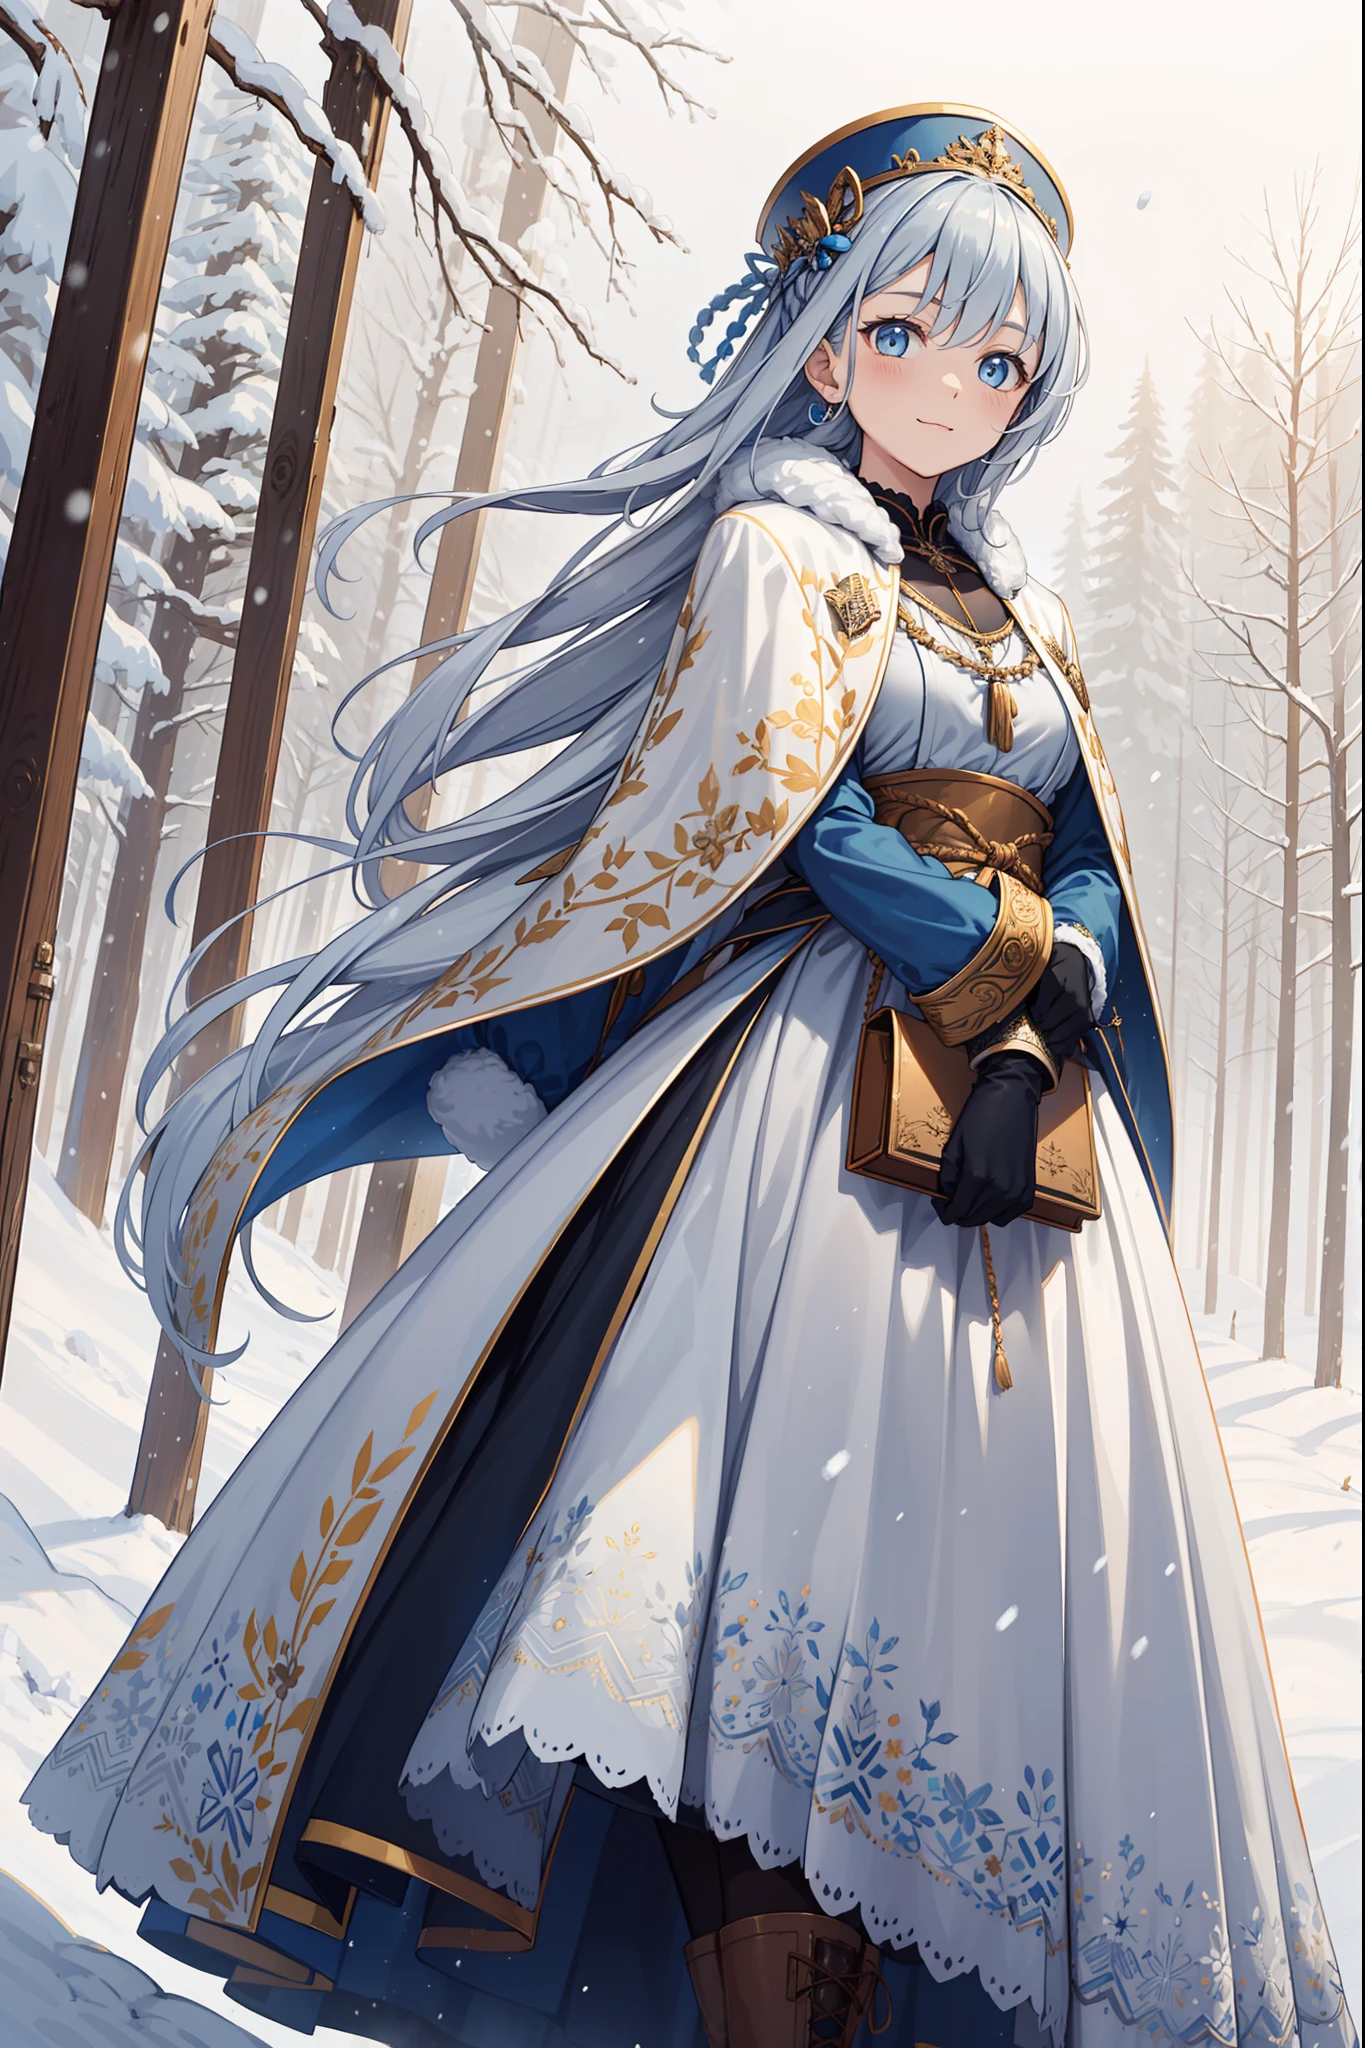 saints，divino，having fun，gentleness，(Military coat:1.1)，Long boots，Long gloves，(Cotton coat)，(Winter hat:1.3)，(Lots of plush:1.1)，down jacket，(Silvery hair:1.1)，eBlue eyeany ornaments made of ice:1.1)，Light gray edges，Light yellow pattern，Sacred motifaximalism，Ruffles，Lace，Delicate embroidery，Delicate pattern，(exquisite costumes)，The background is the cold earth，solo person，Beautiful detailed face，(Wind and snow hit:1.1)，Enchanted